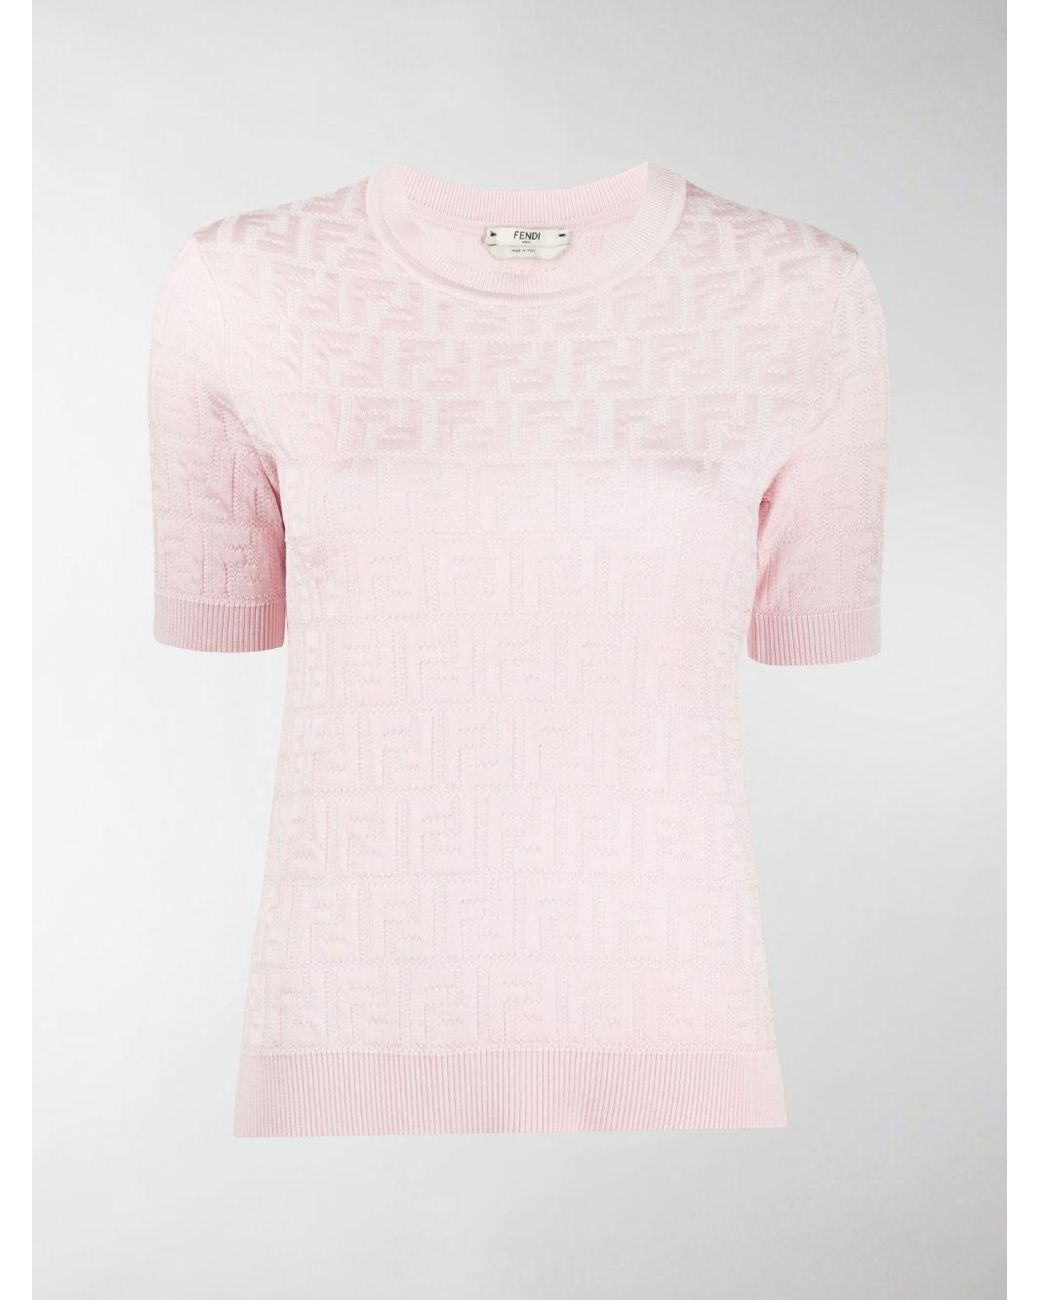 Fendi Cotton Ff Motif Knitted Top in Pink | Lyst